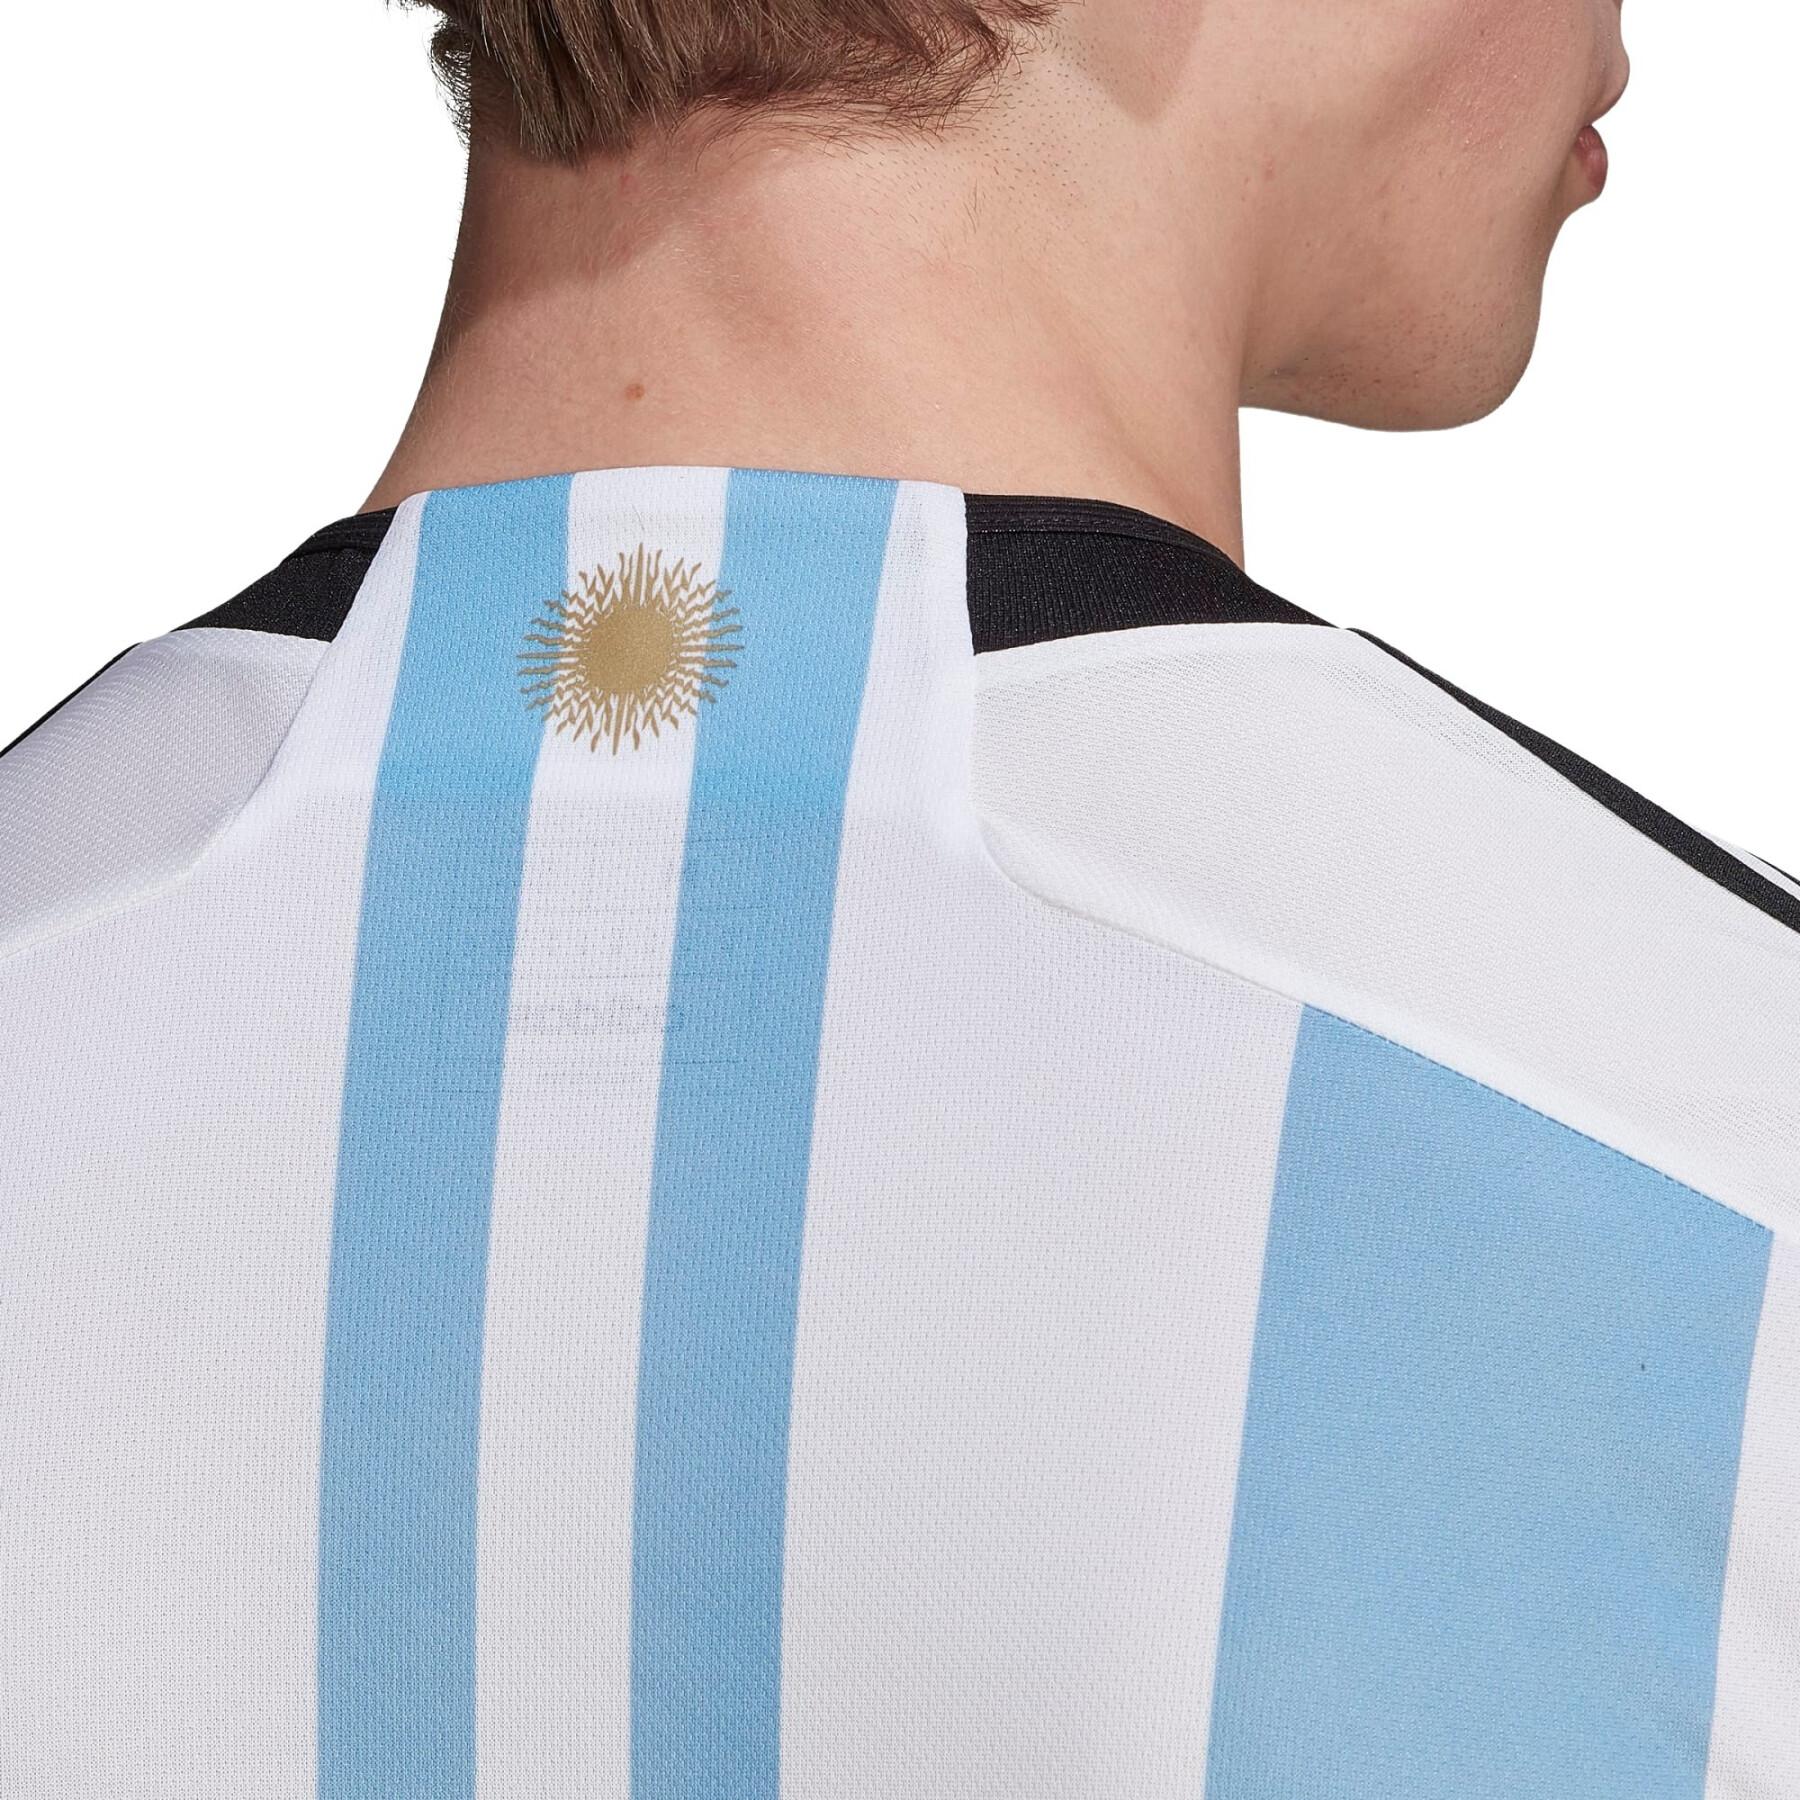 Home jersey World Cup 2022 Argentine